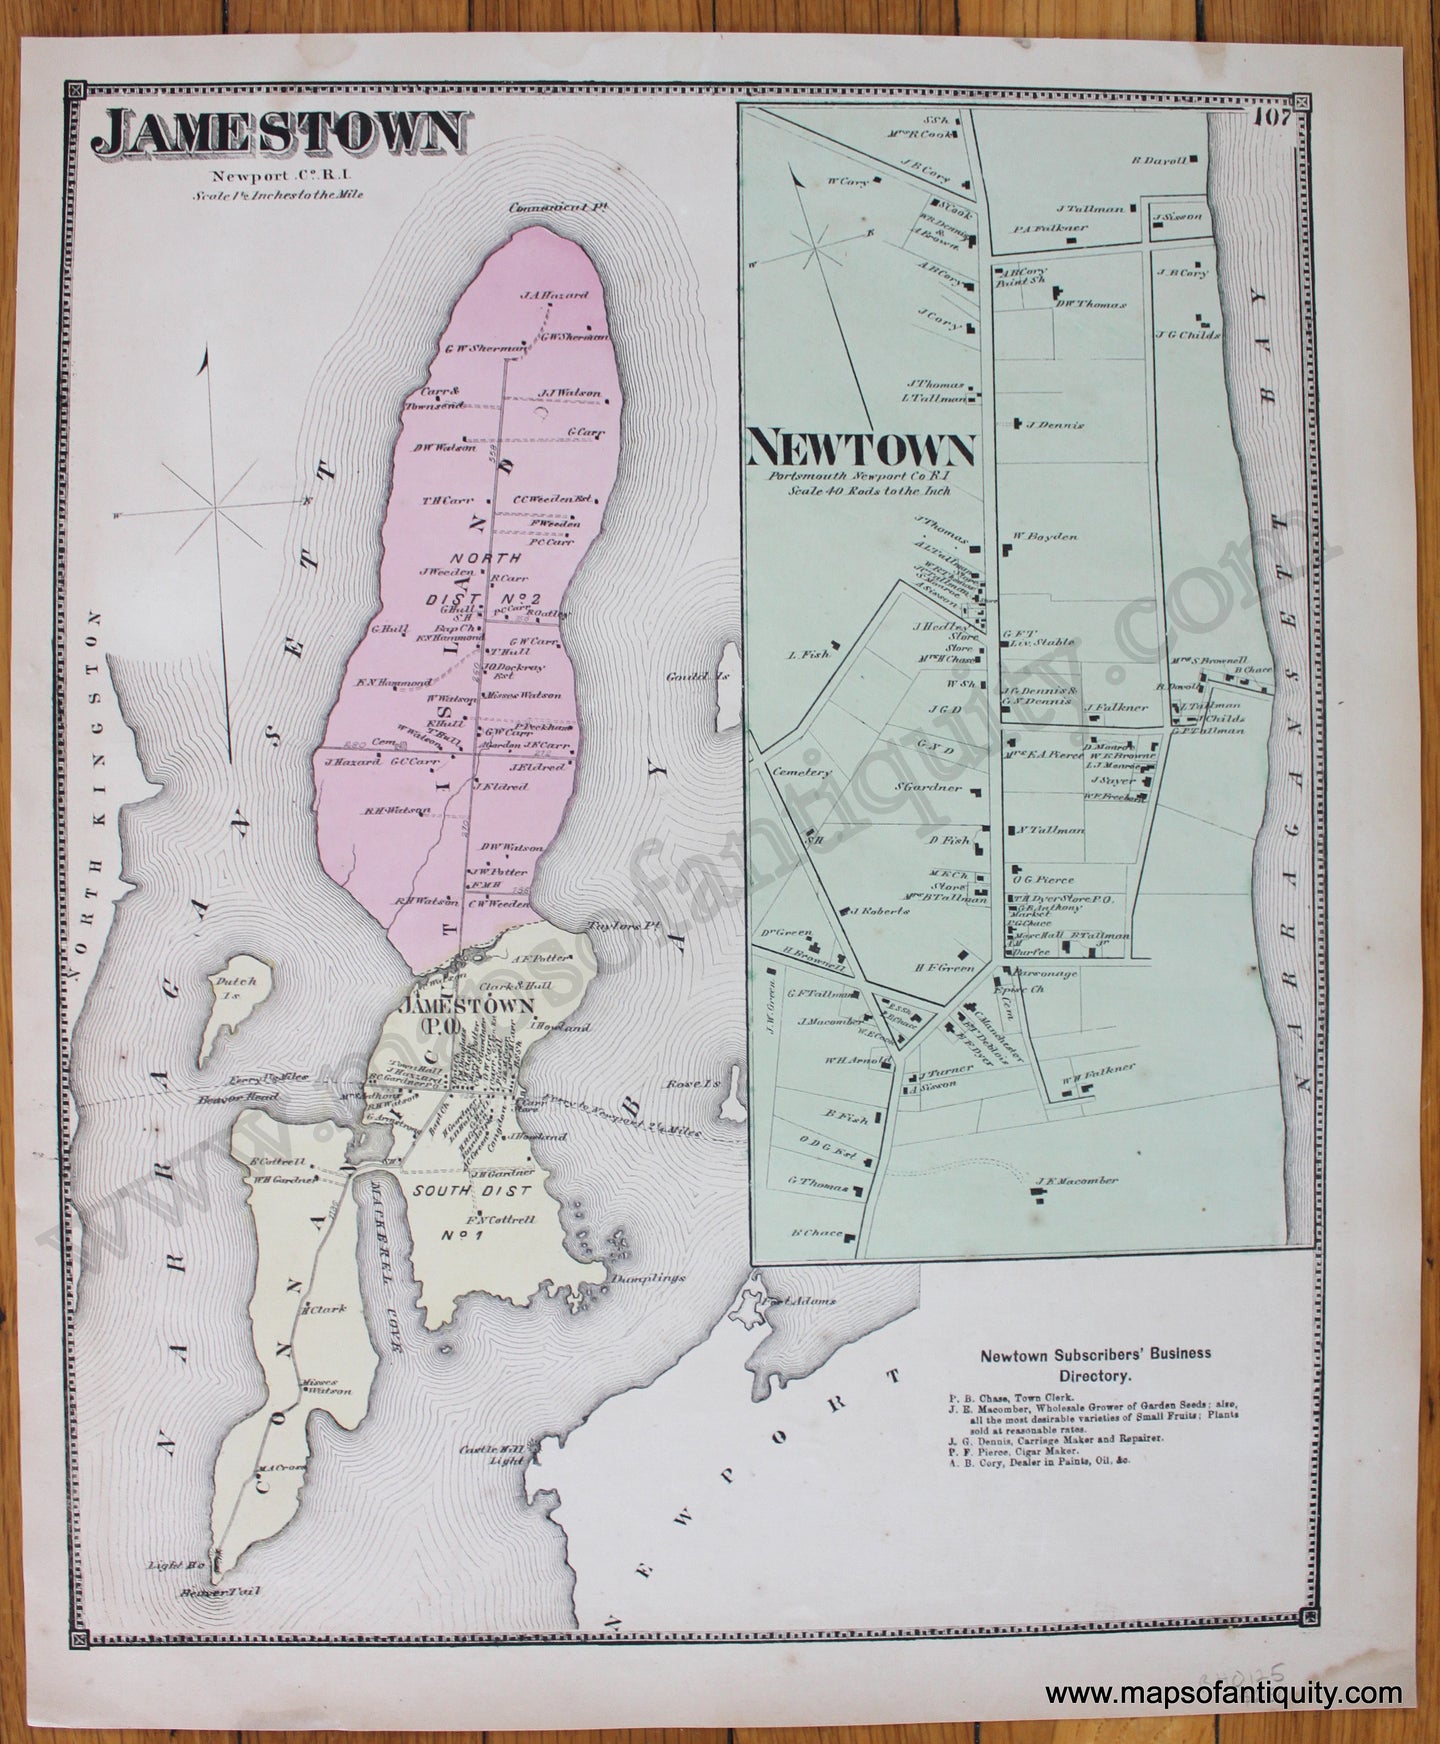 Antique-Hand-Colored-Map-Jamestown-Newtown-Rhode-Island--1870-Beers-Maps-Of-Antiquity